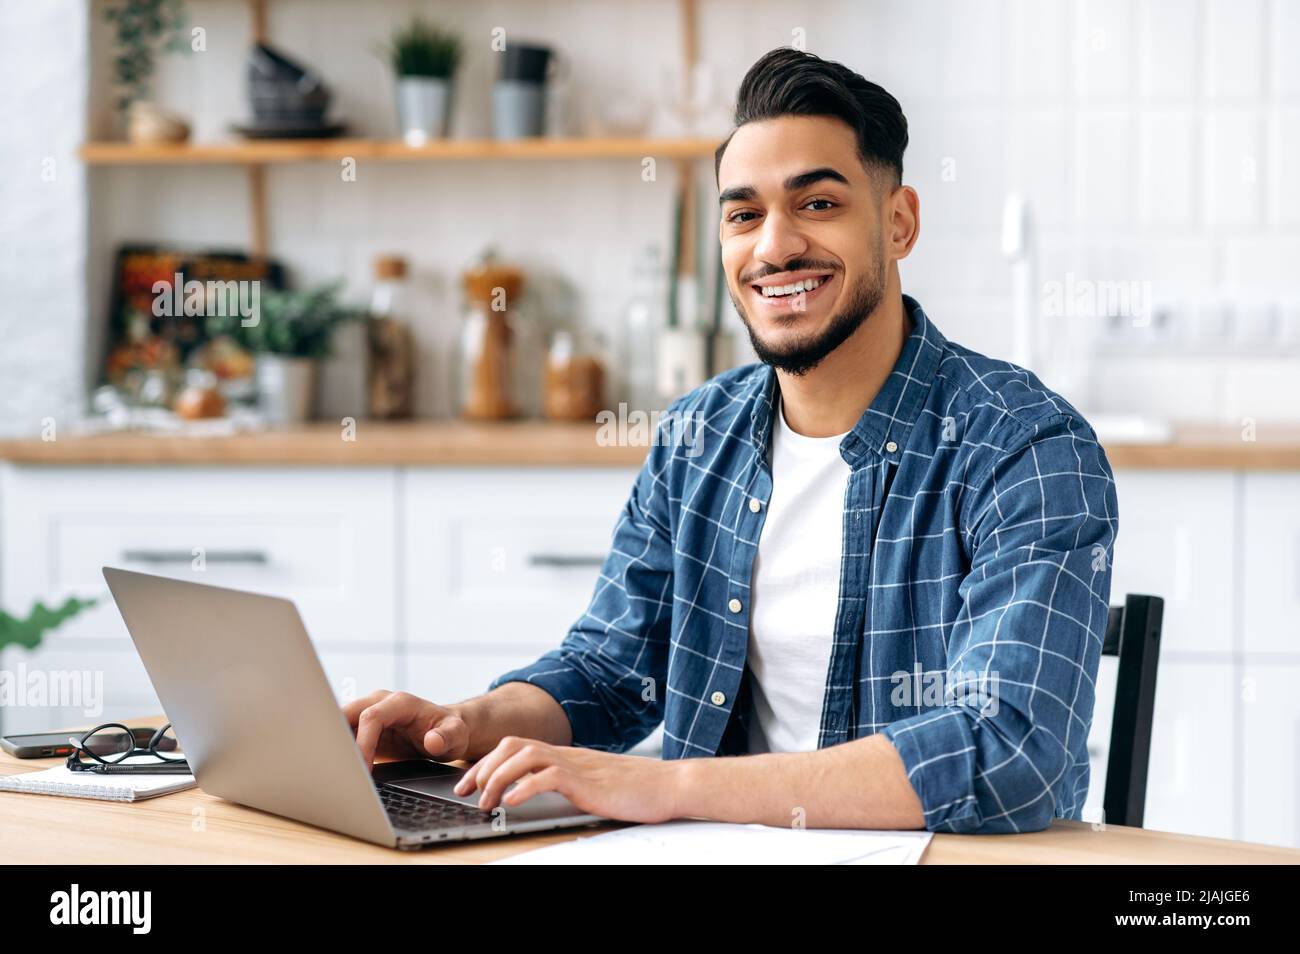 Portrait of attractive positive indian or arabian man, entrepreneur or freelancer, working remotely while sitting at home in the kitchen, using laptop, develop creative successful project, smiling Stock Photo